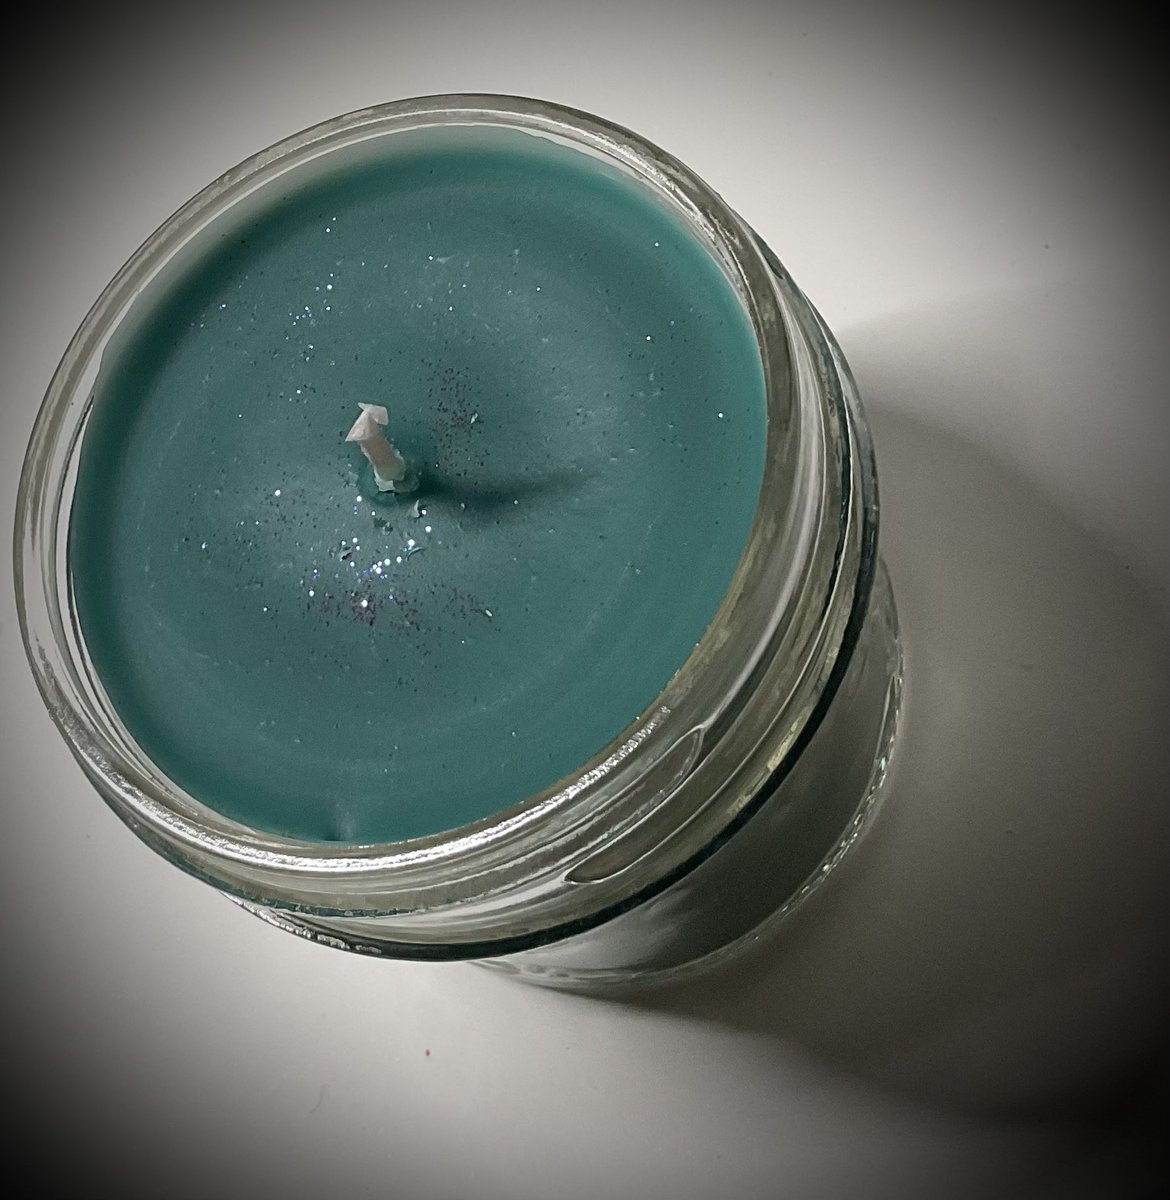 We only have one of these delicious Frankincense jar candles left…act quickly.
#wintersolstice #yule #xmas #festivaloflight #hannukah #christmas #perfectgift #homemadegift #handcraftedgift #handmadecard #witchjoseph #holidaycandle #frankincense